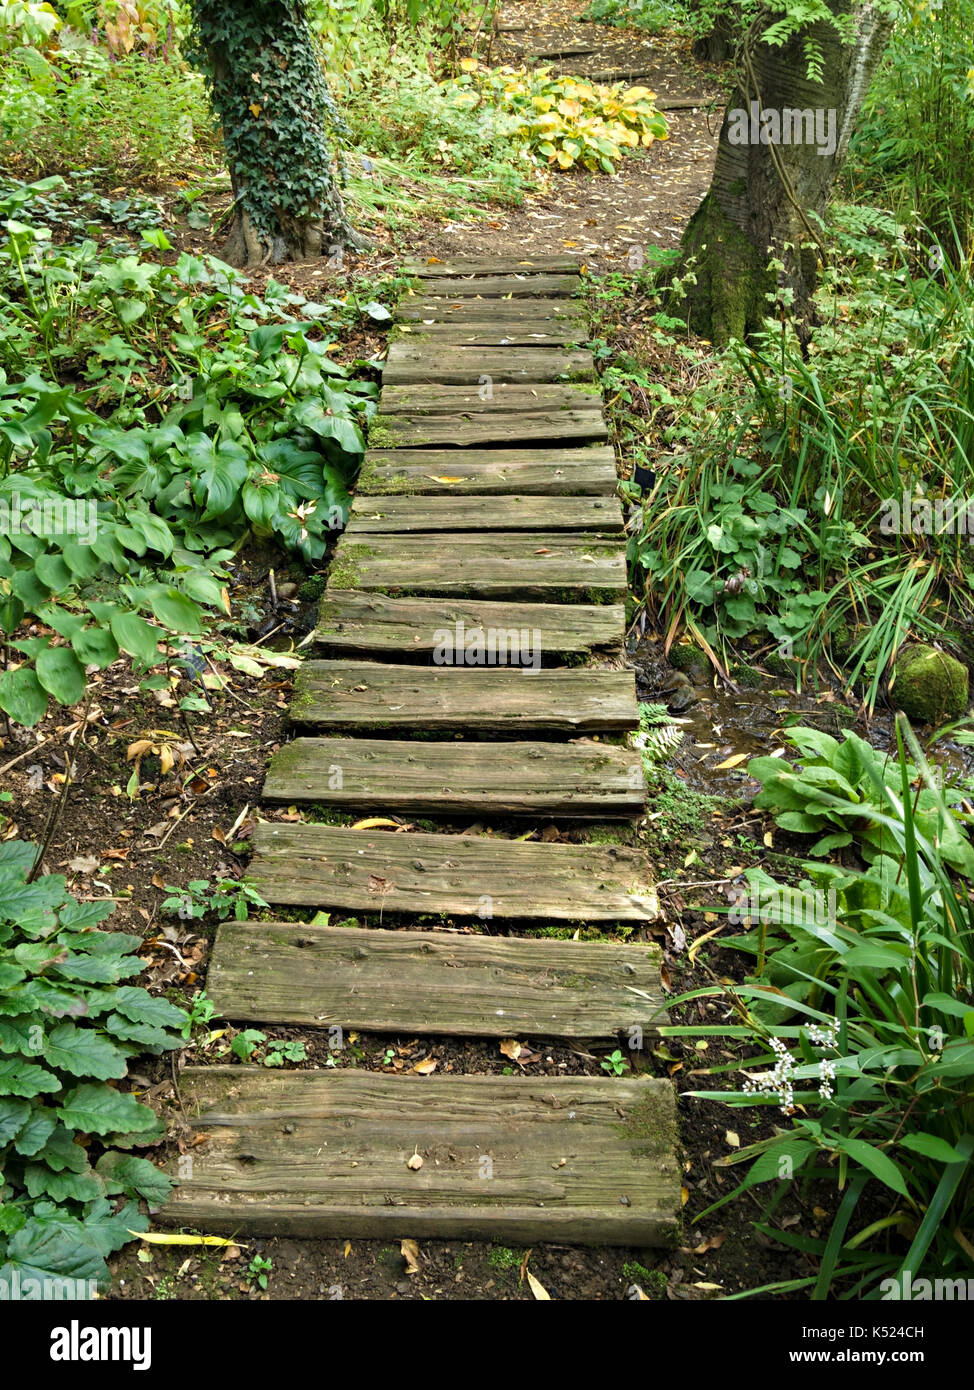 Old rustic woodland garden path made from split wooden timber logs